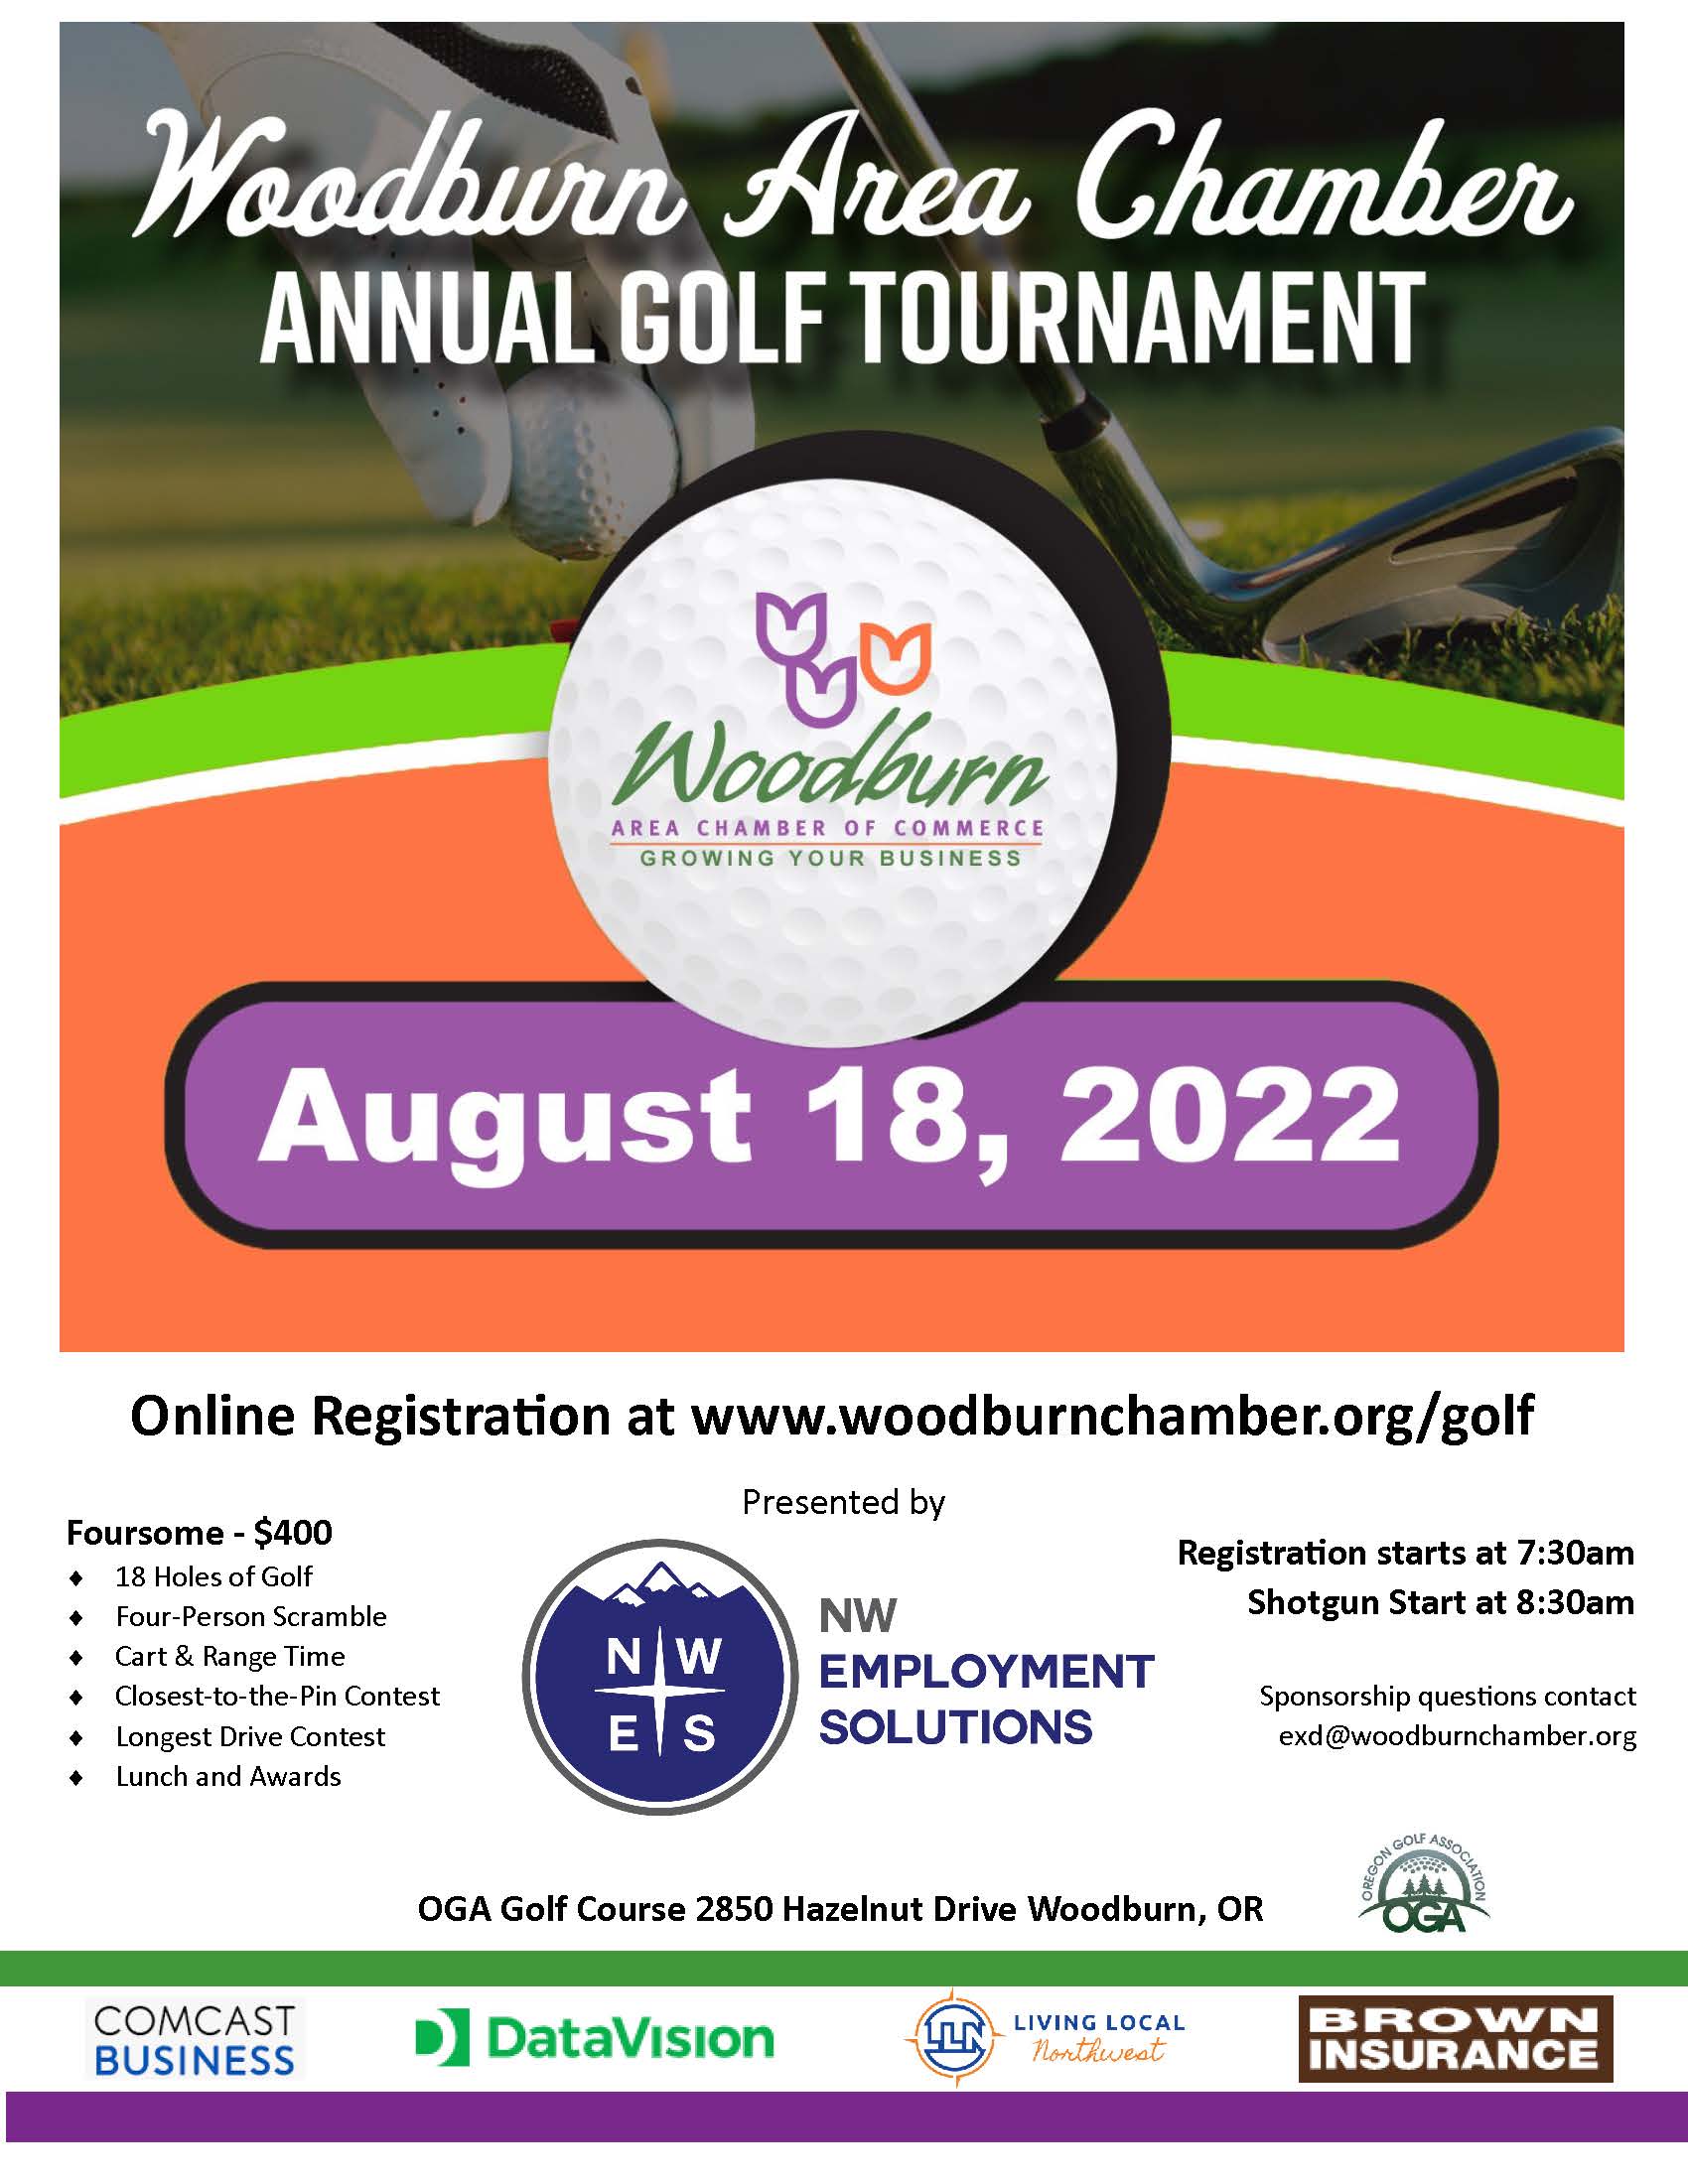 2022 Golf Flyer with sponsors 003